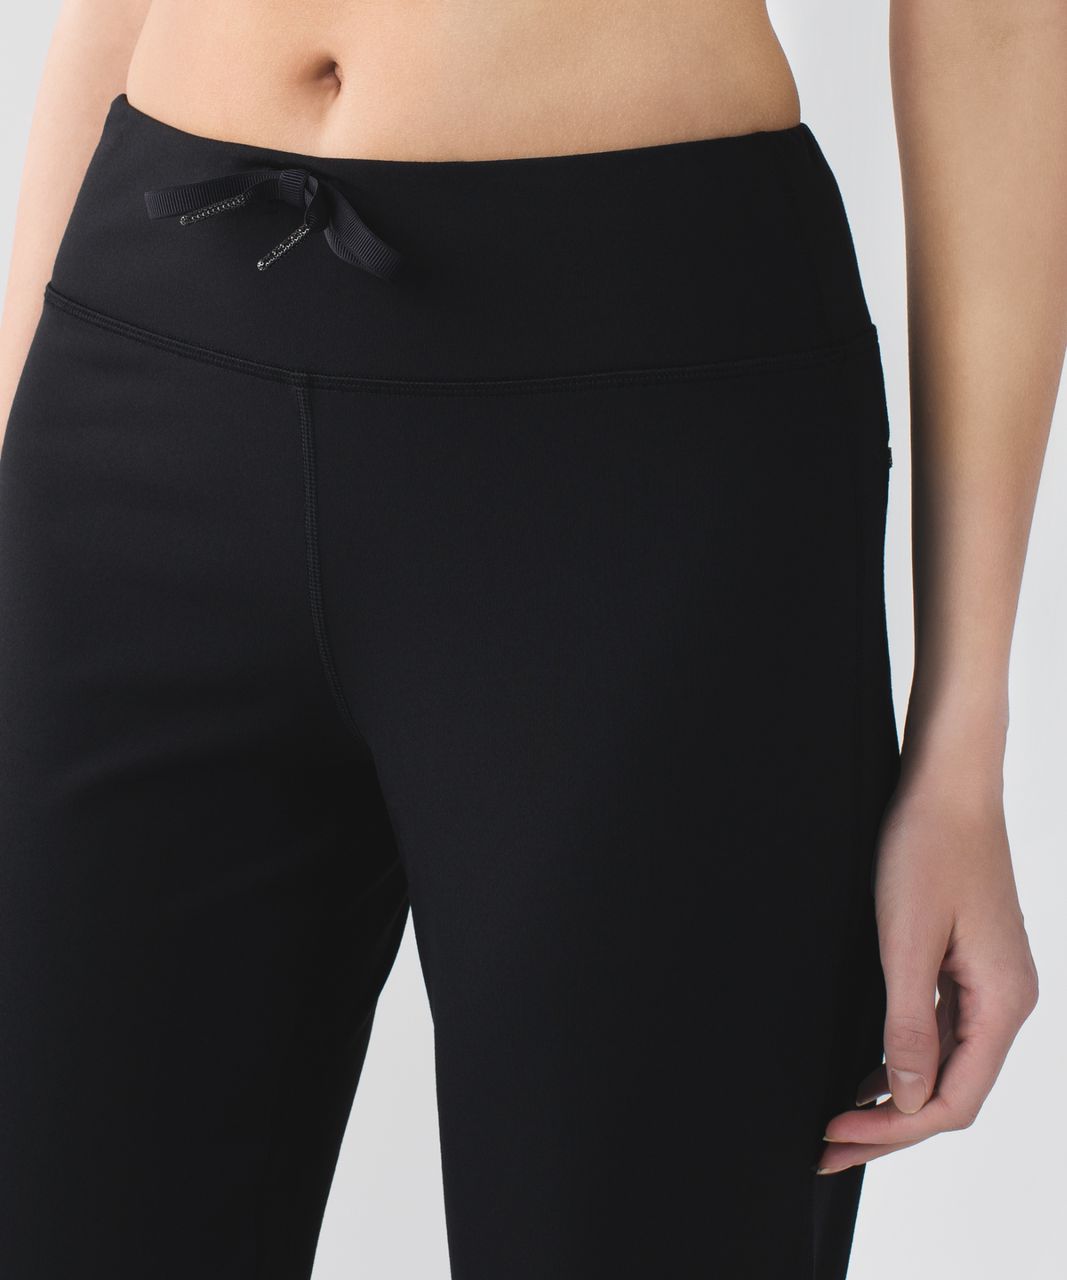 Lululemon Relaxed Fit Pant - Black